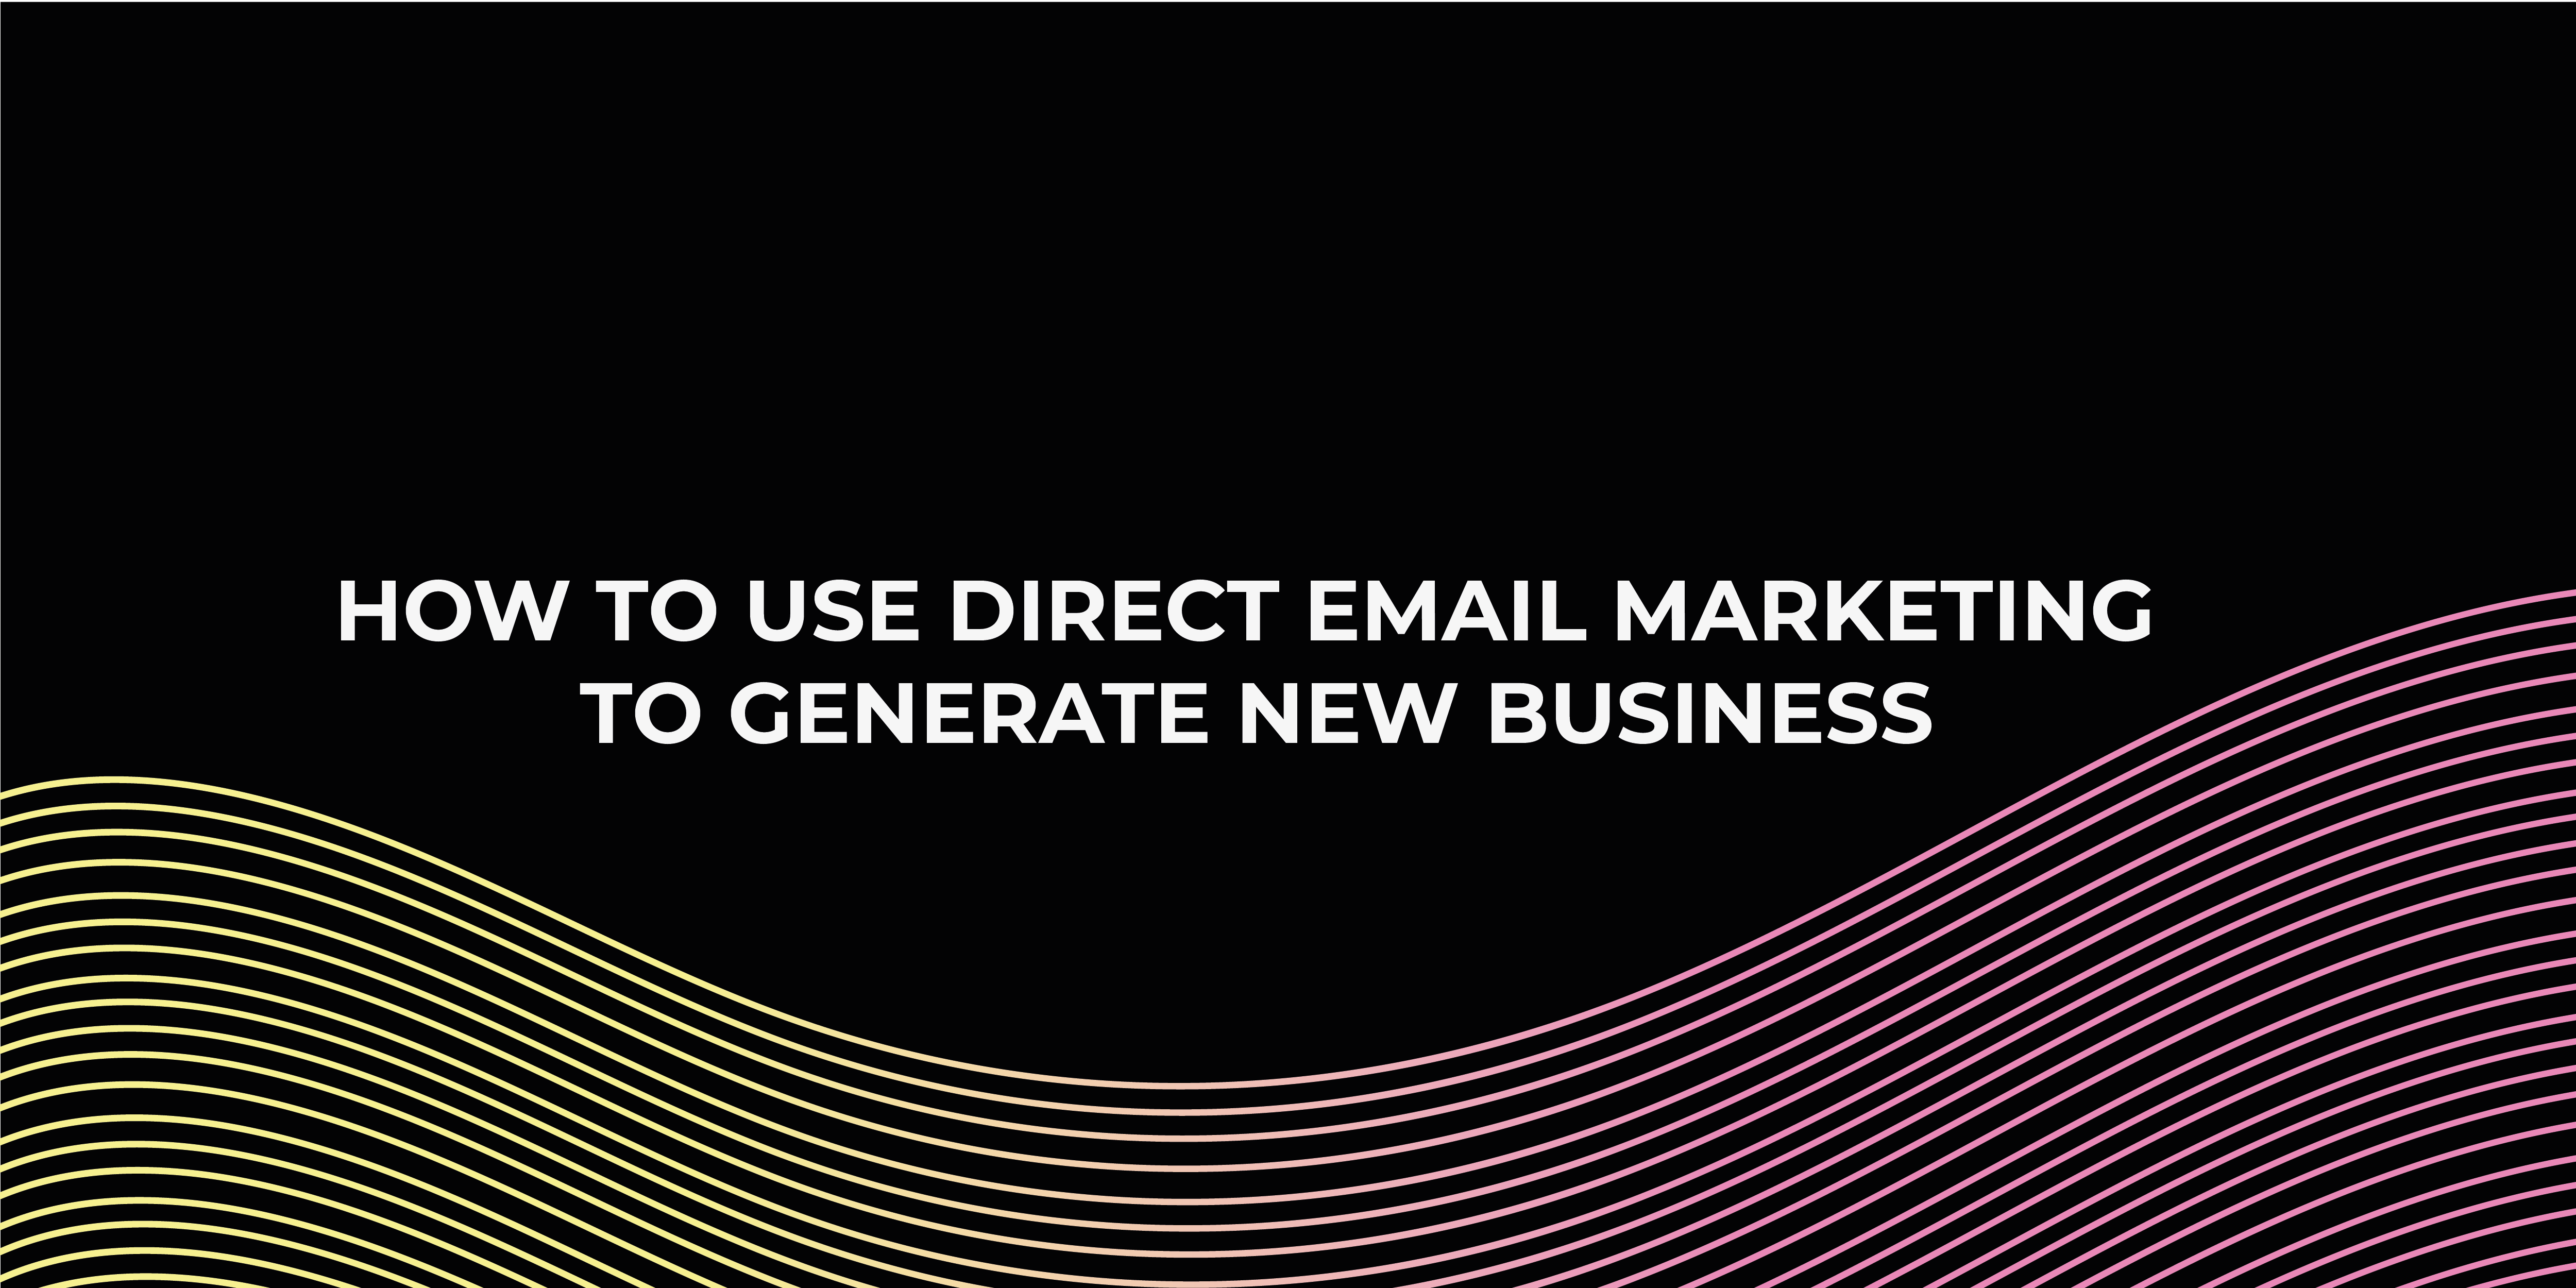 How to use direct email marketing